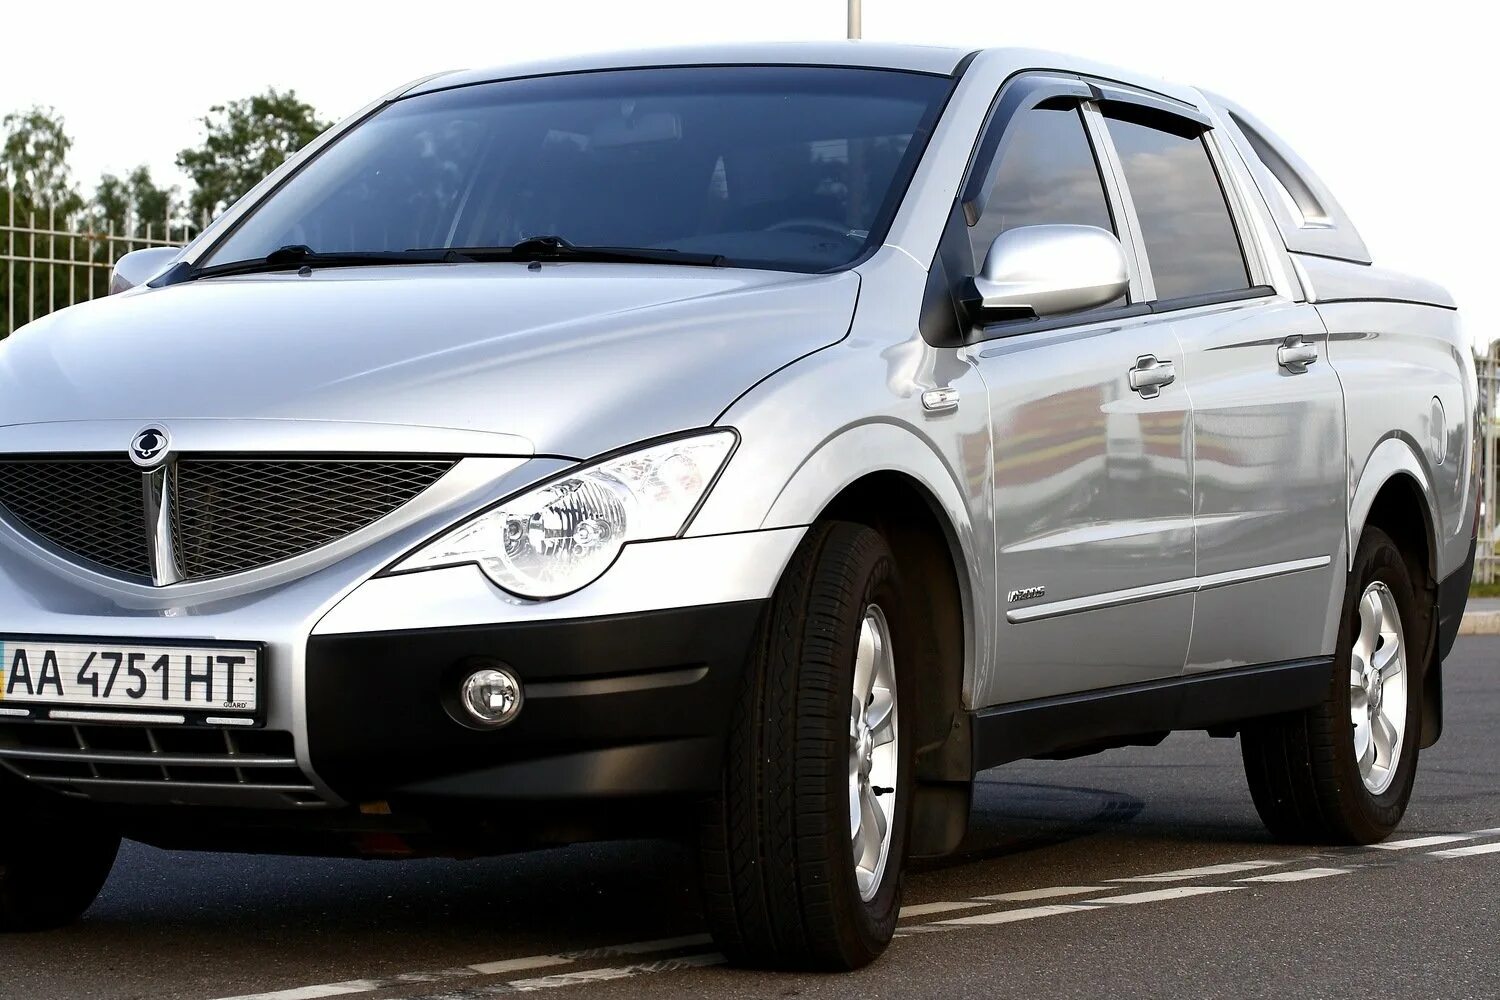 SSANGYONG Actyon Sports. Саньенг Актион 2008. SSANGYONG Actyon Sports 2008. SSANGYONG Actyon Sport.